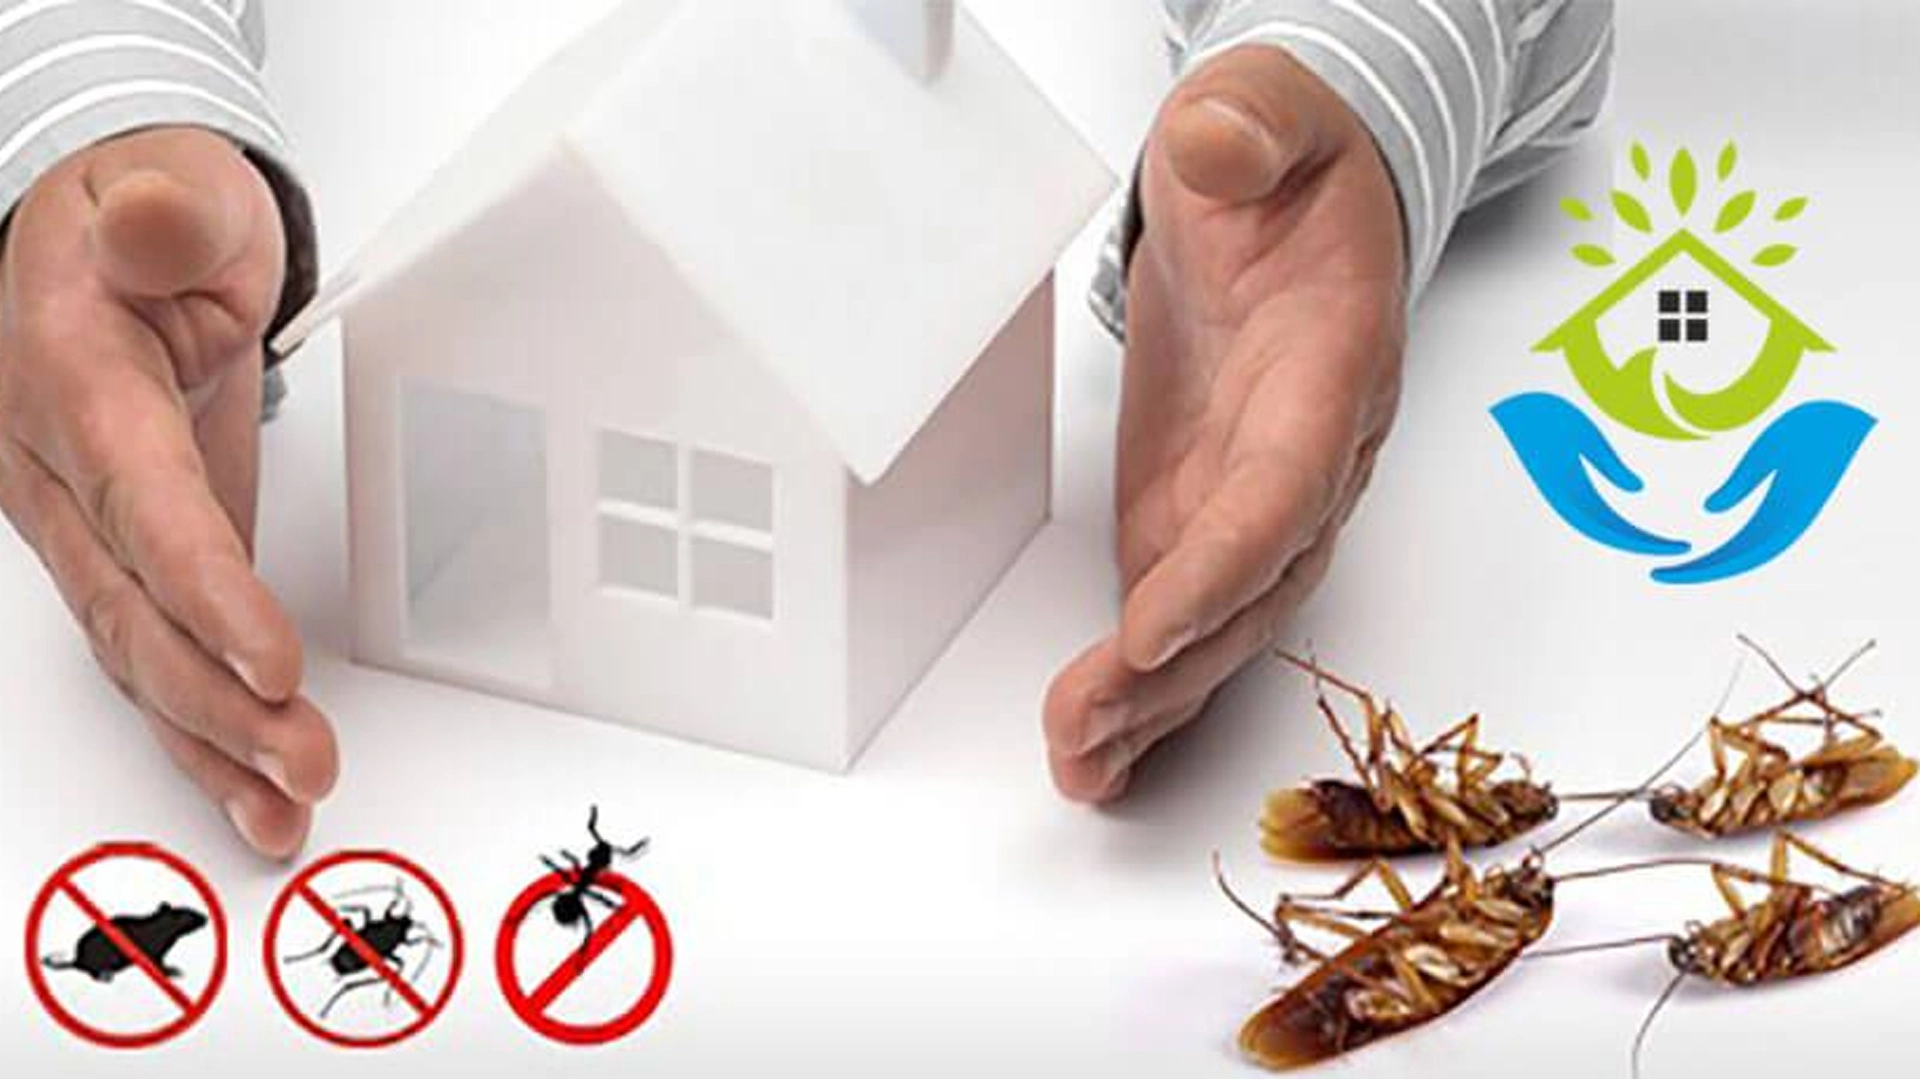 How to Keep Pests Out of Your Home